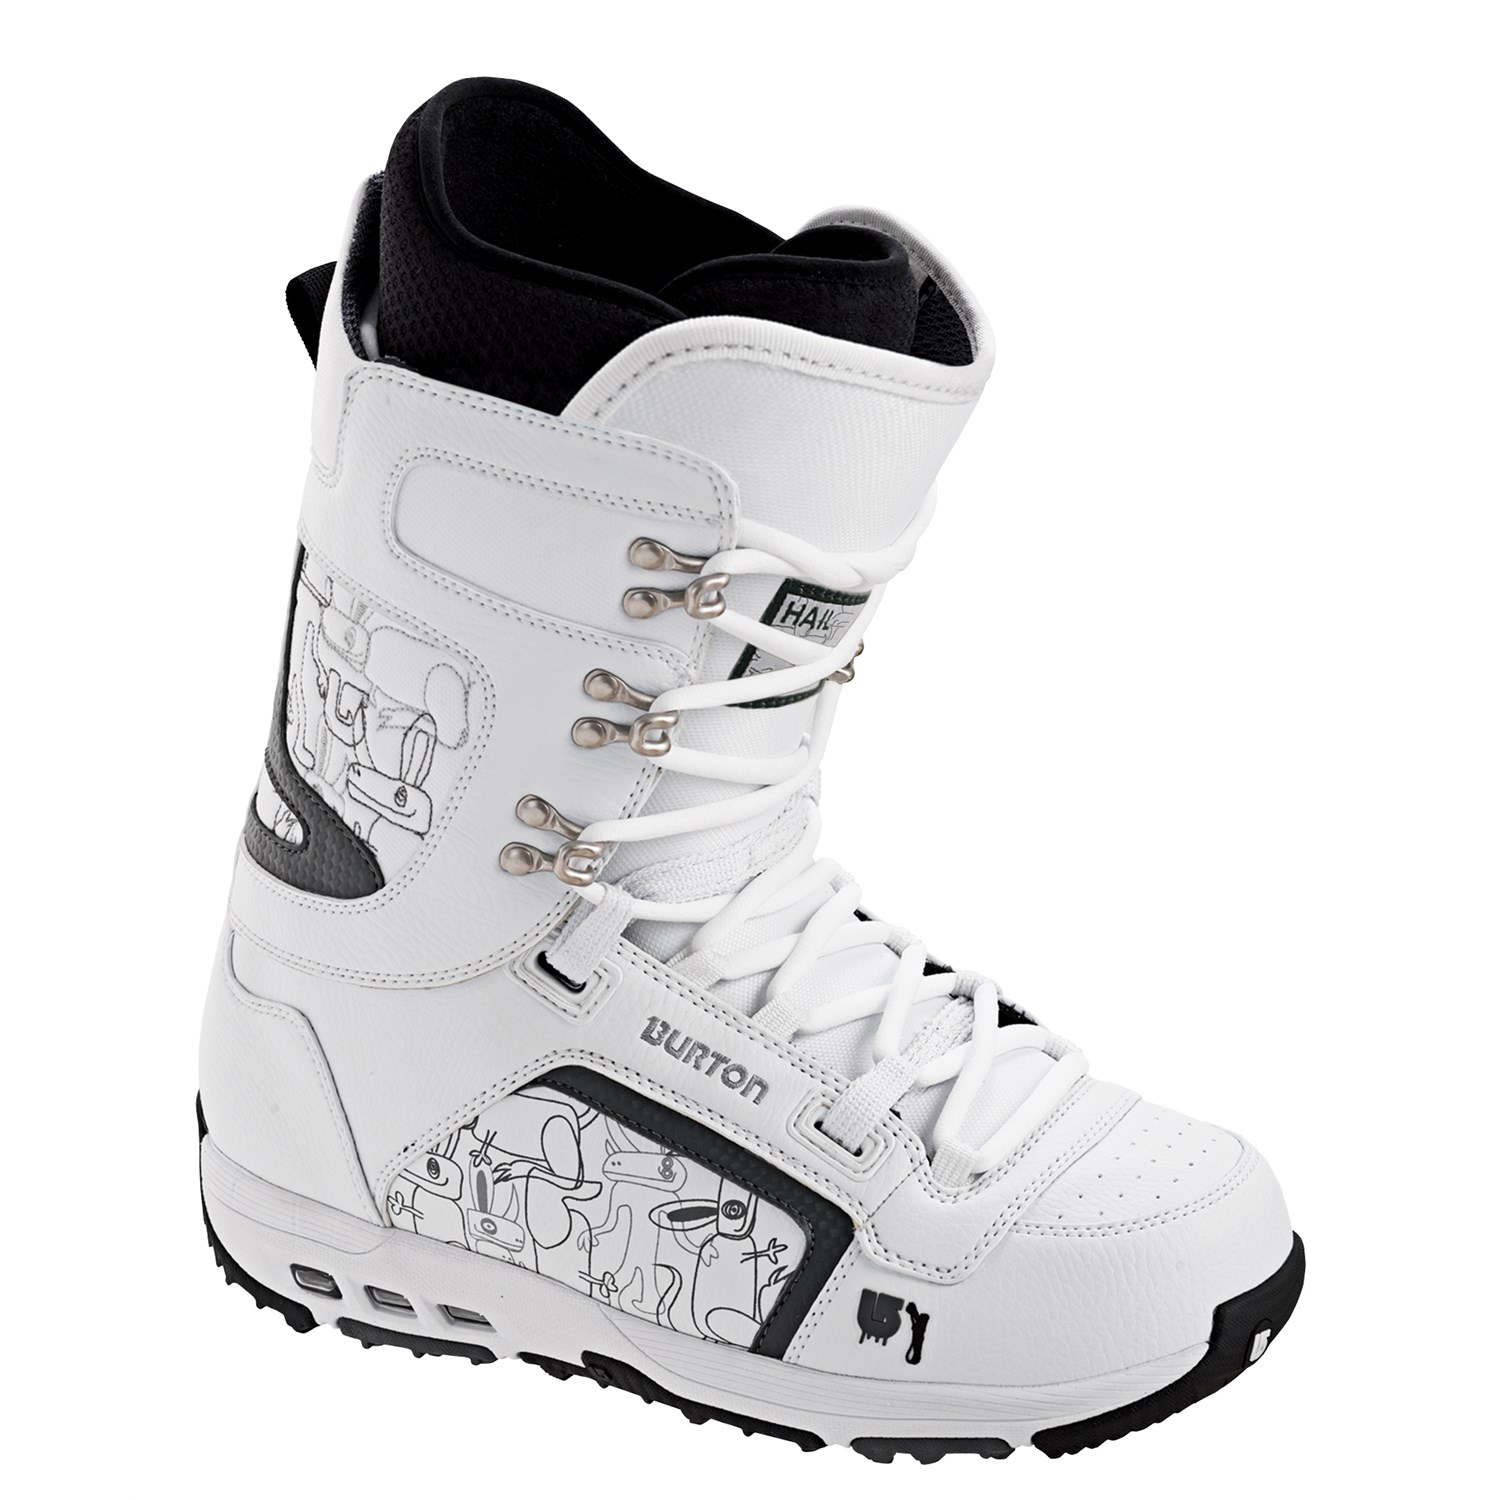 Snowboard Boots 2008 |